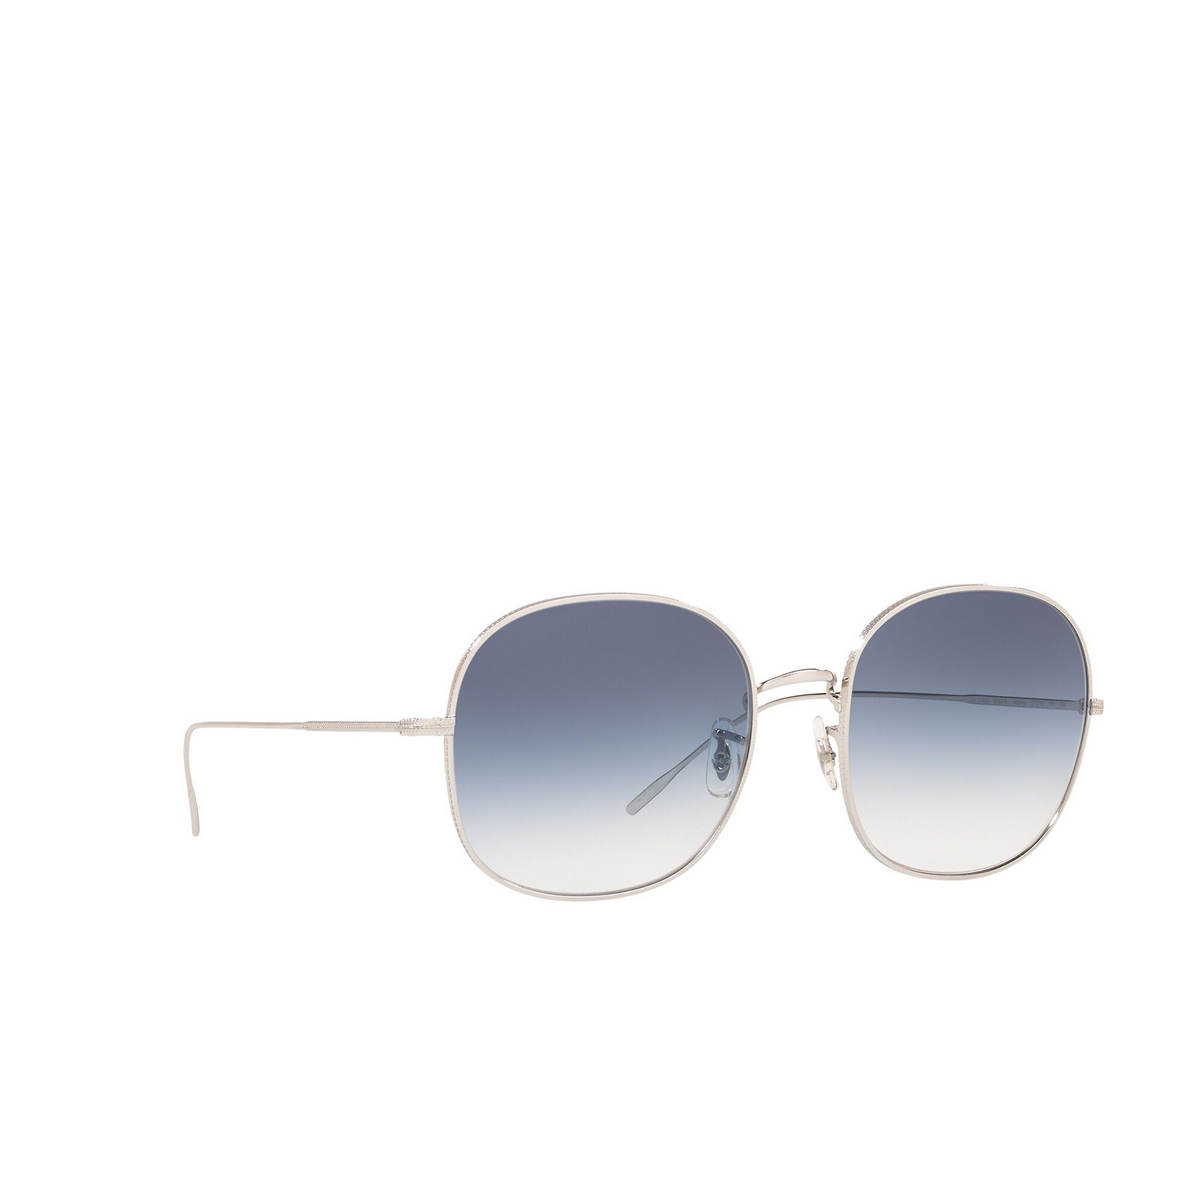 Oliver Peoples® Round Sunglasses: Mehrie OV1255S color Silver 503619 - three-quarters view.